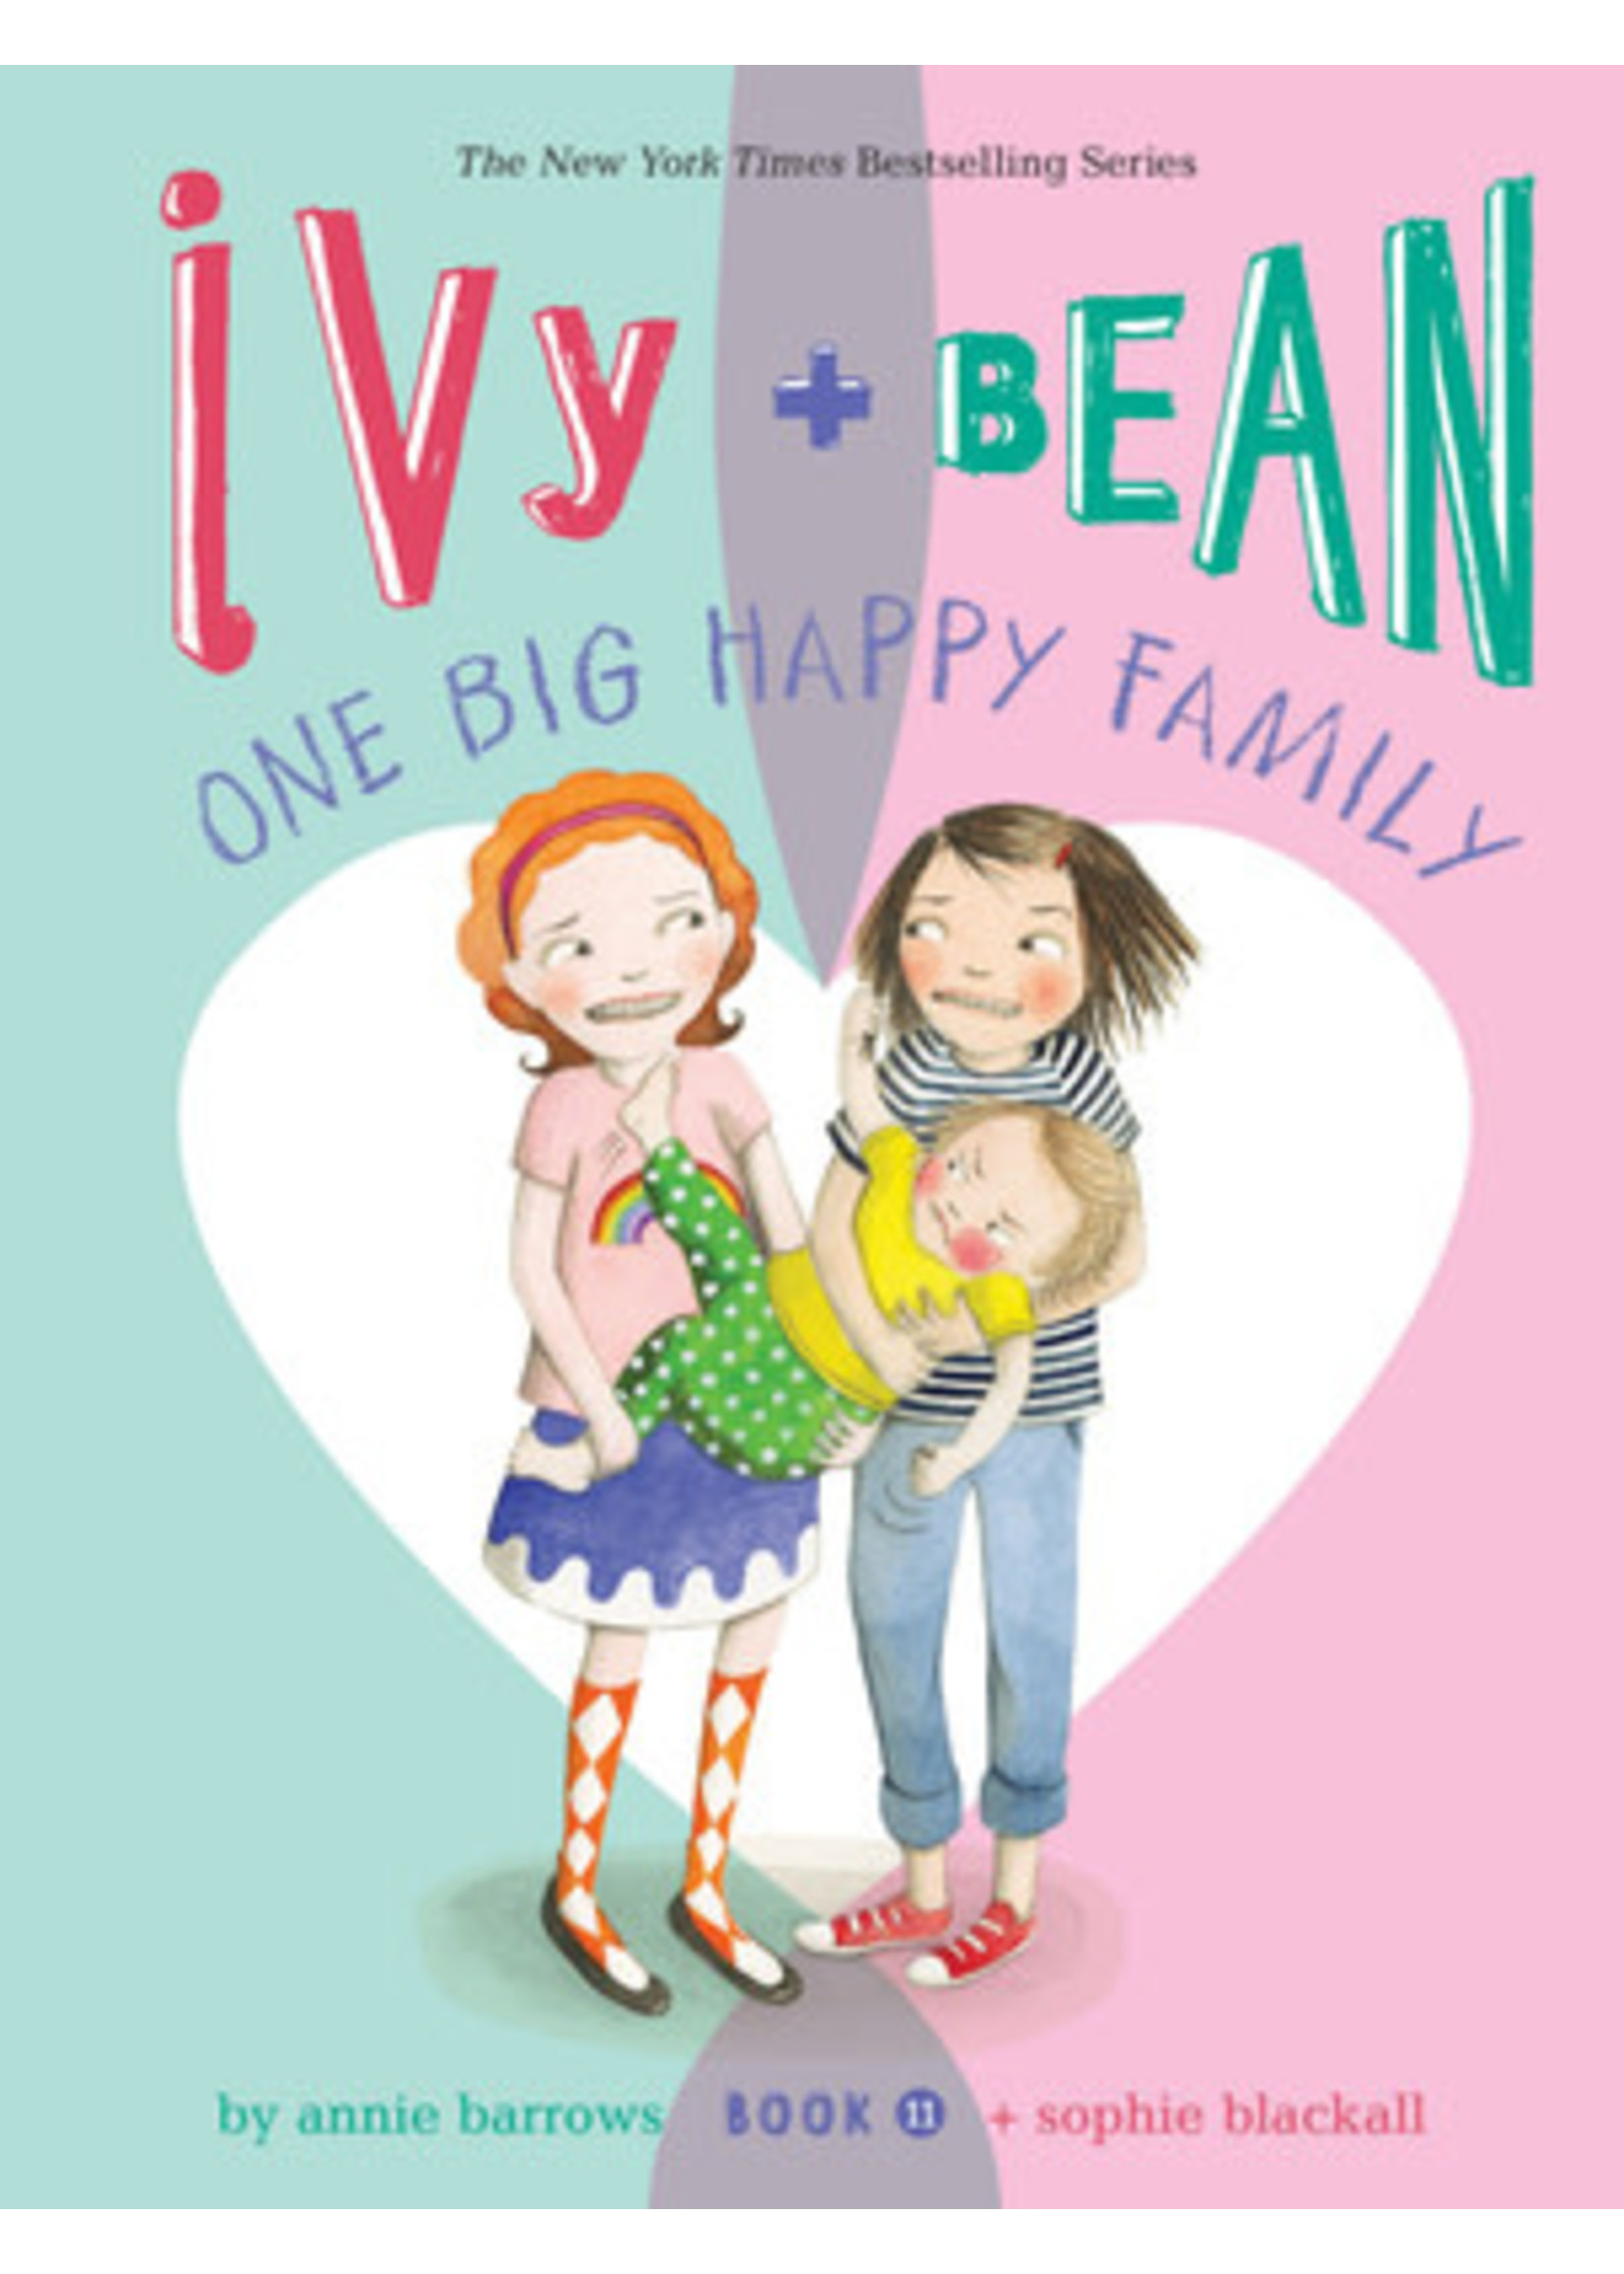 One Big Happy Family (Ivy & Bean #11) by Annie Barrows,  Sophie Blackall